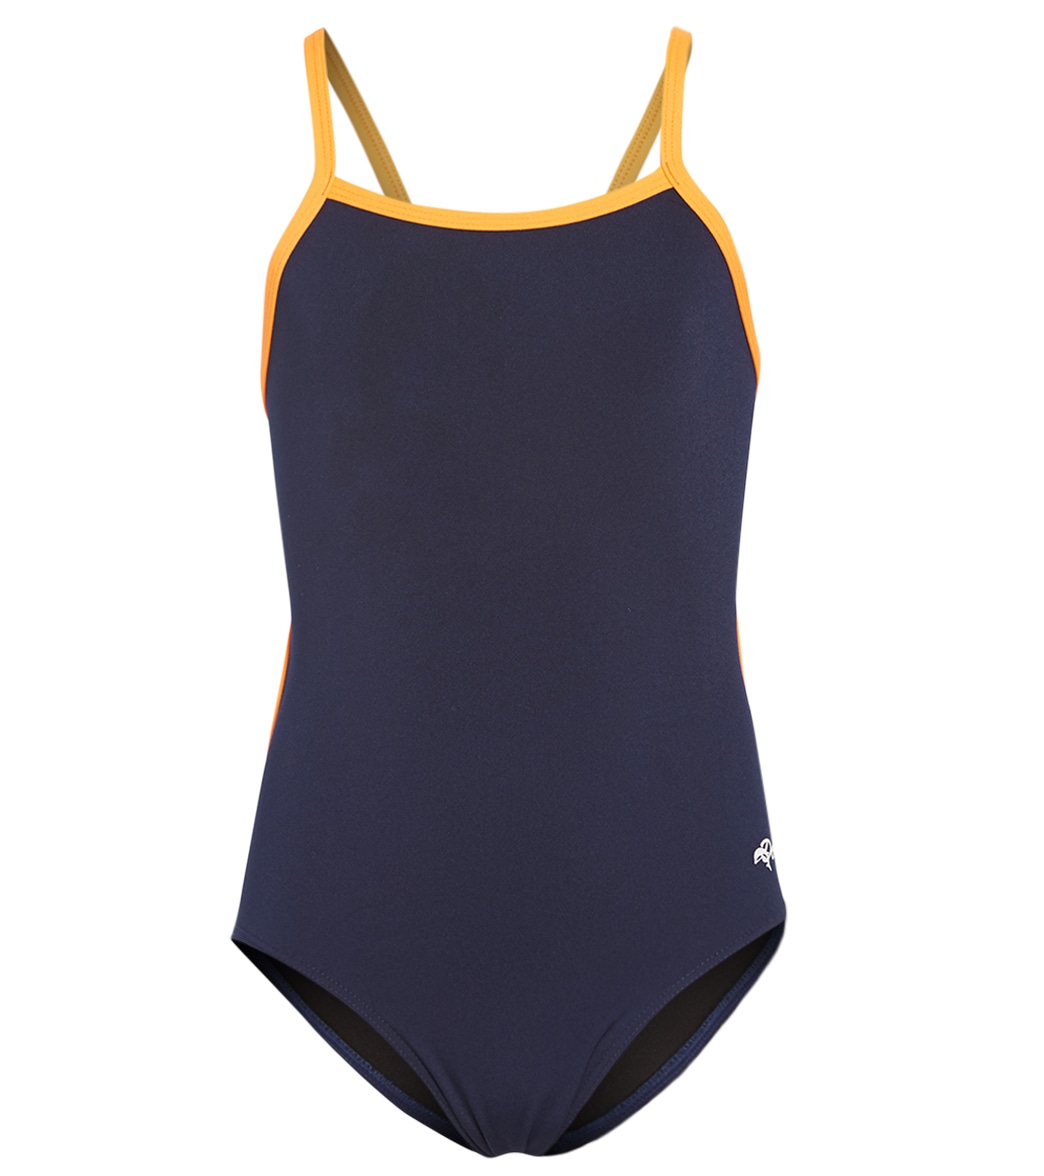 Dolfin All Poly Youth Varsity Solid String Back - Navy/Orange 22 Swimsuit - Swimoutlet.com